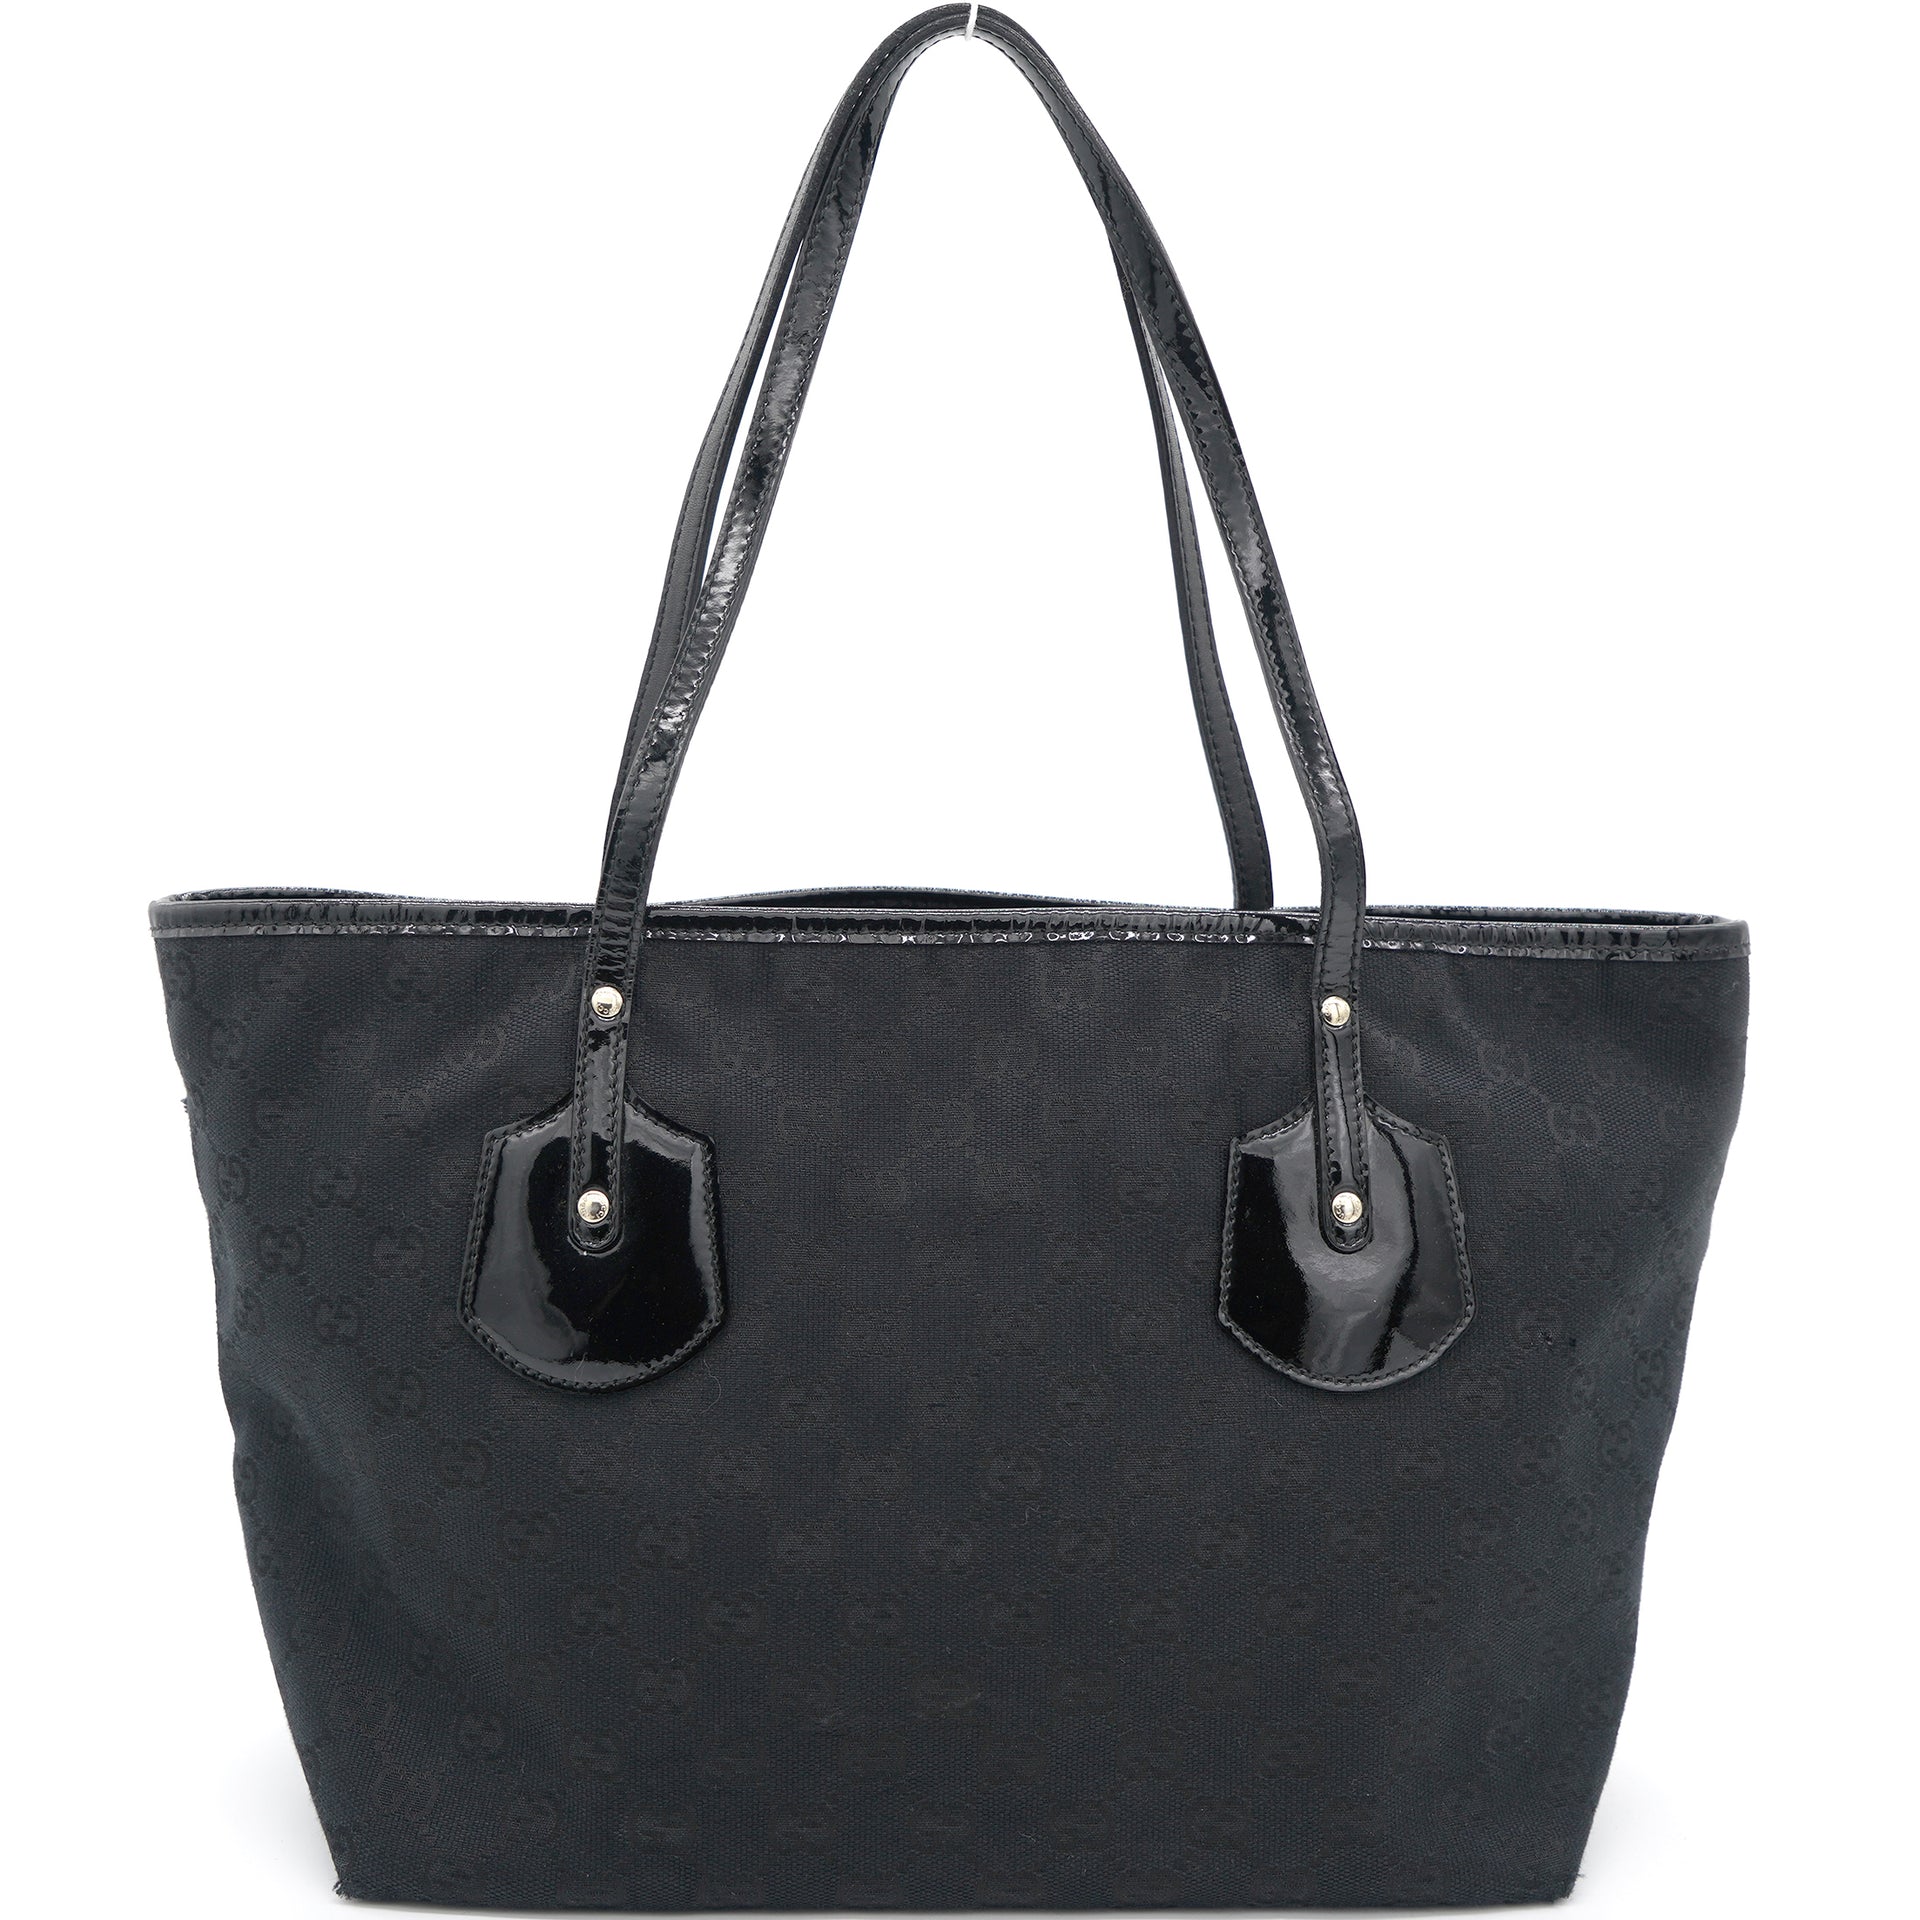 Black GG Canvas and Patent Leather Tote